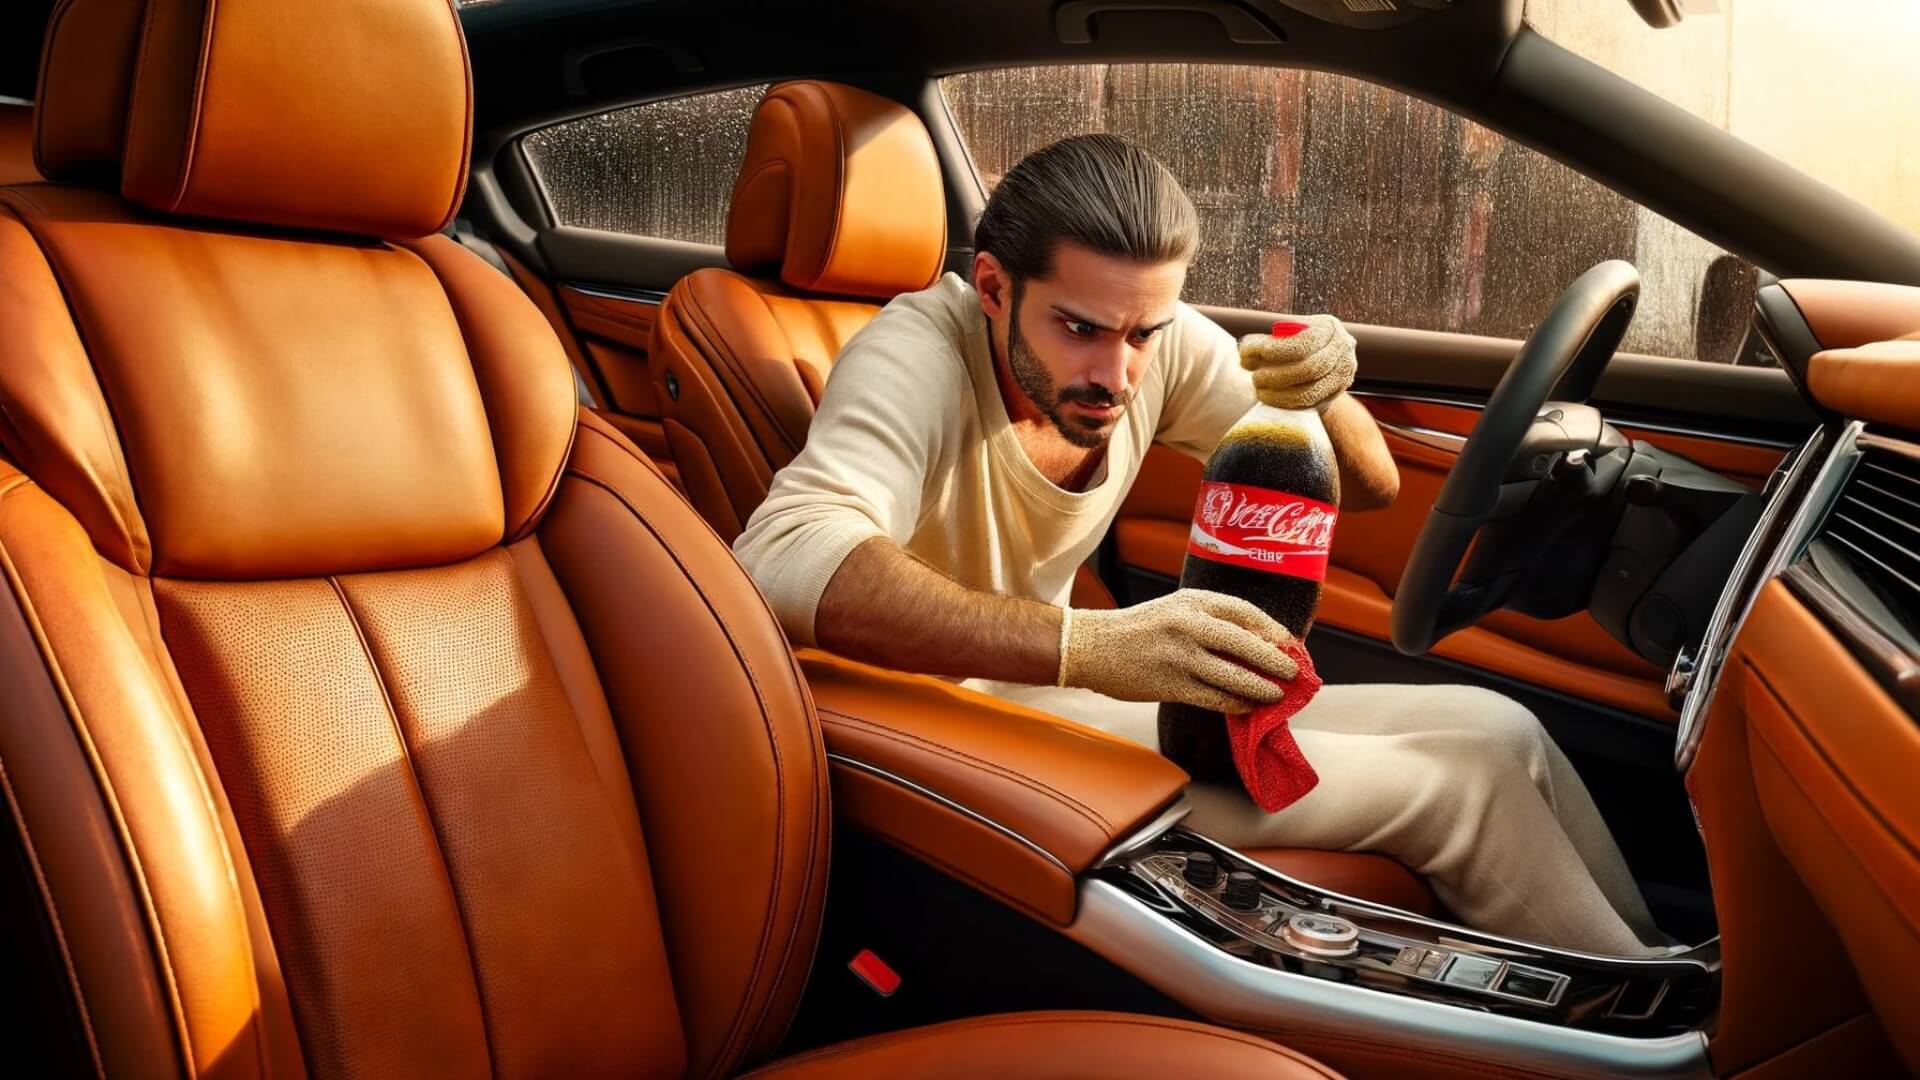 a man reflects on the consequences of using coca-cola to condition his leather car seats